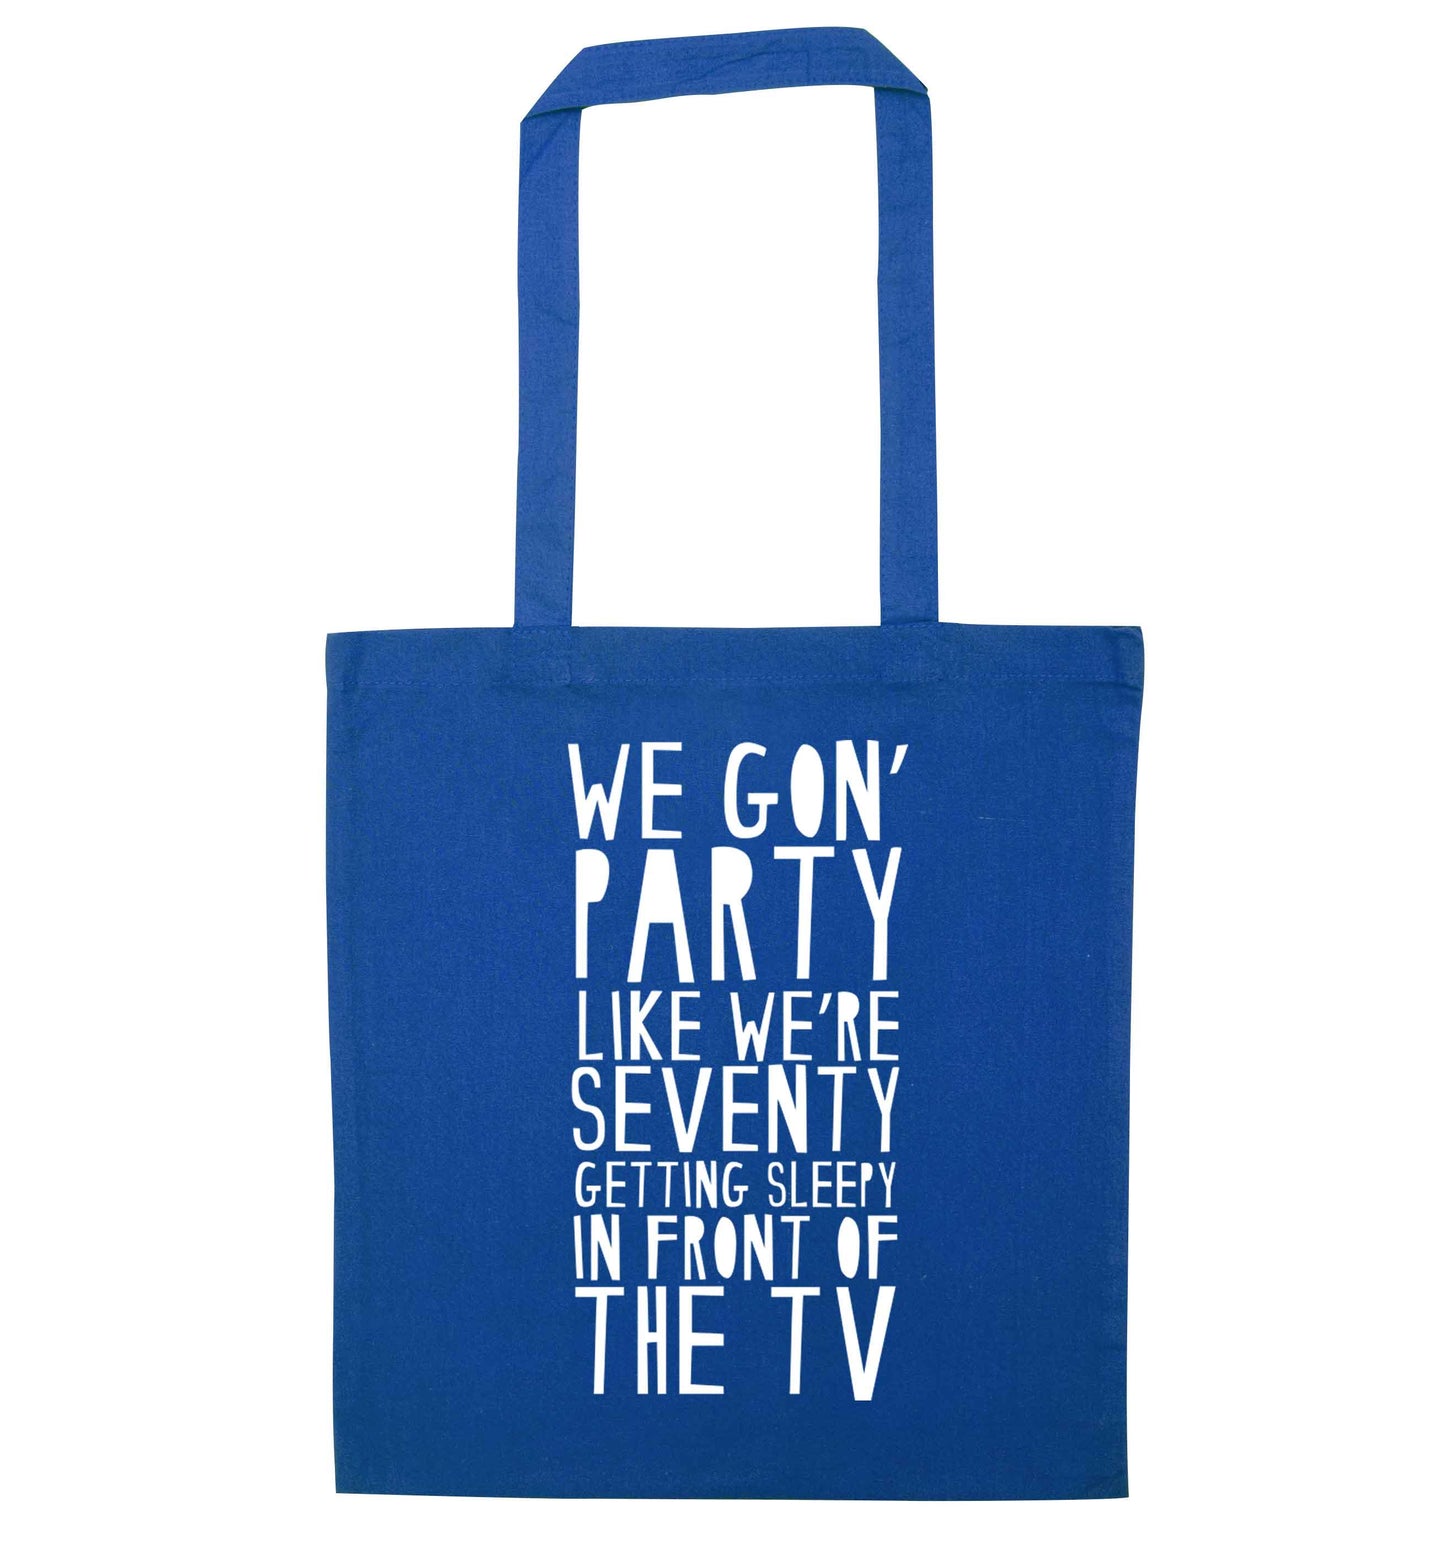 We gon' party like we're seventy getting sleepy in front of the TV blue tote bag